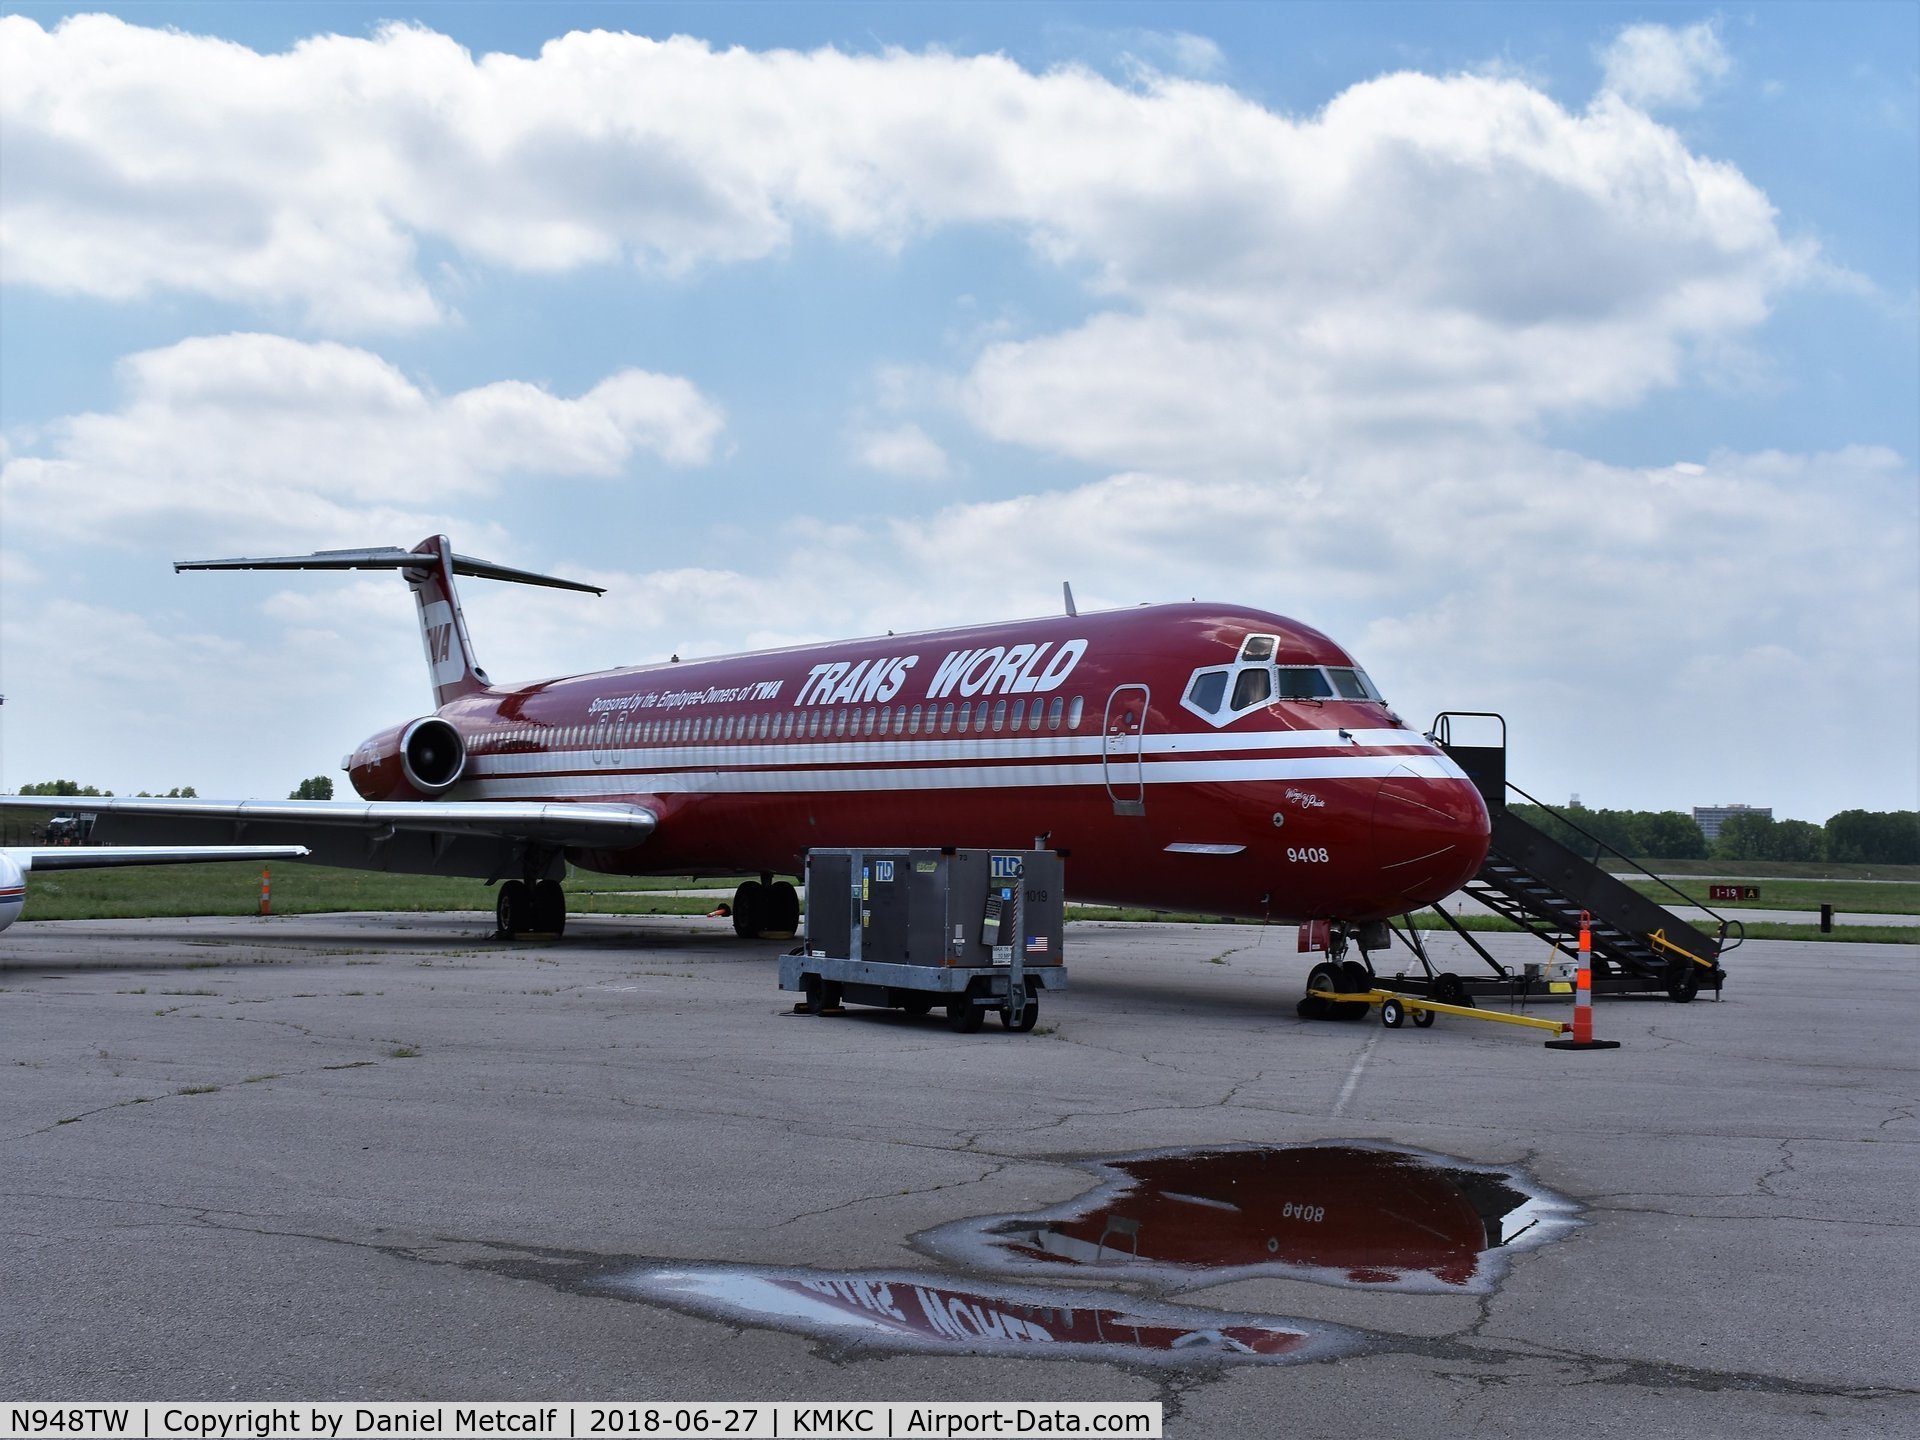 N948TW, 1987 McDonnell Douglas MD-83 (DC-9-83) C/N 49575, Seen at the TWA Museum